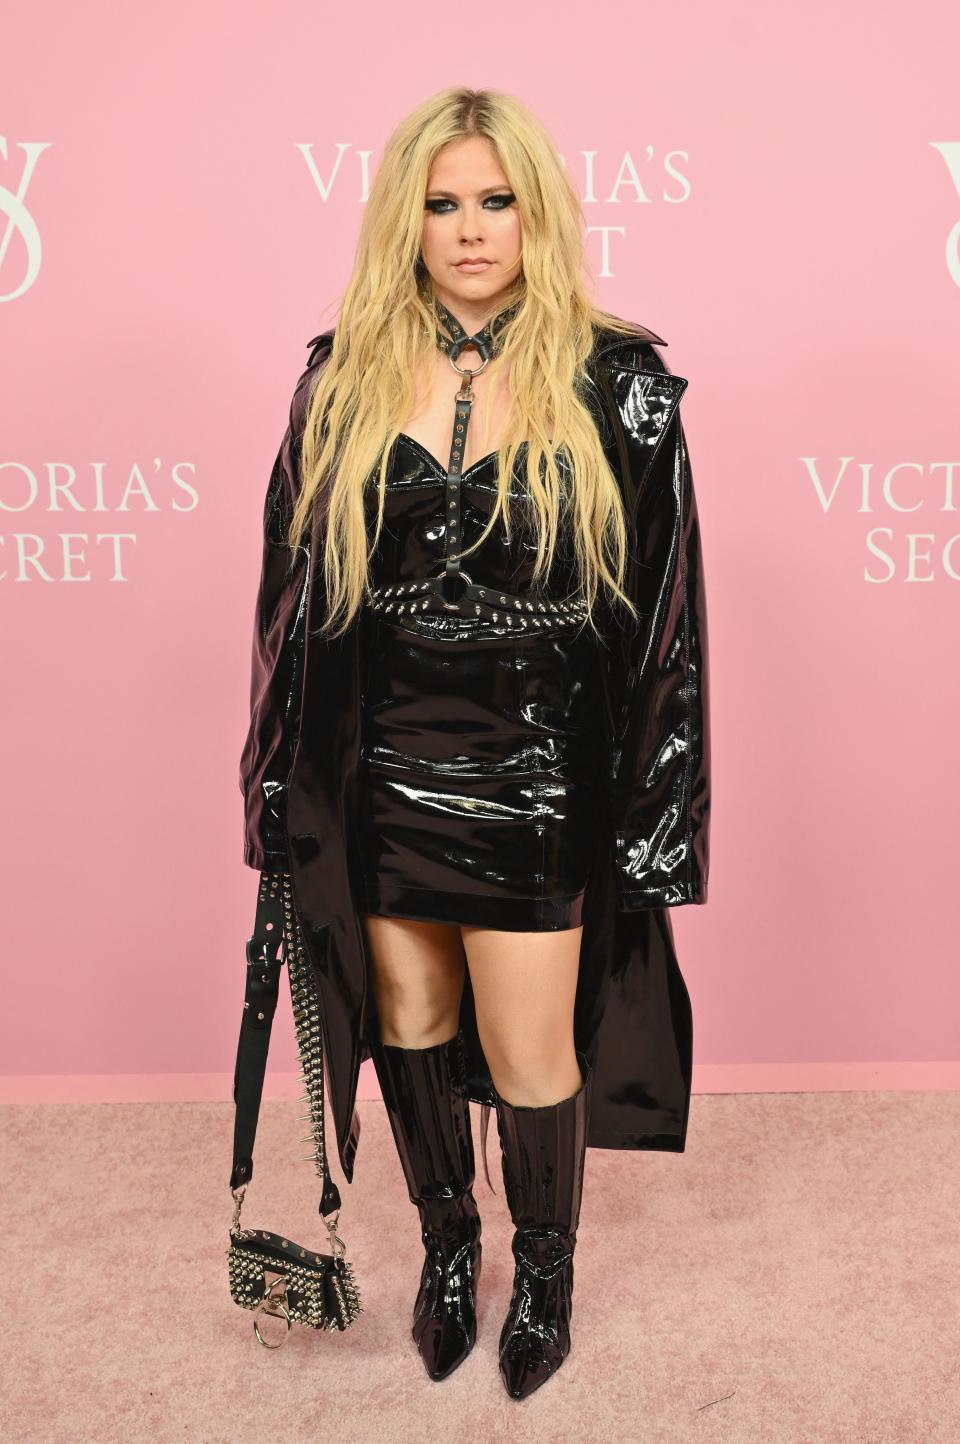 The Canadian singer kicked off New York Fashion Week with a special event hosted by Victoria's Secret. (Photo by ANGELA WEISS / AFP) (Photo by ANGELA WEISS/AFP via Getty Images)